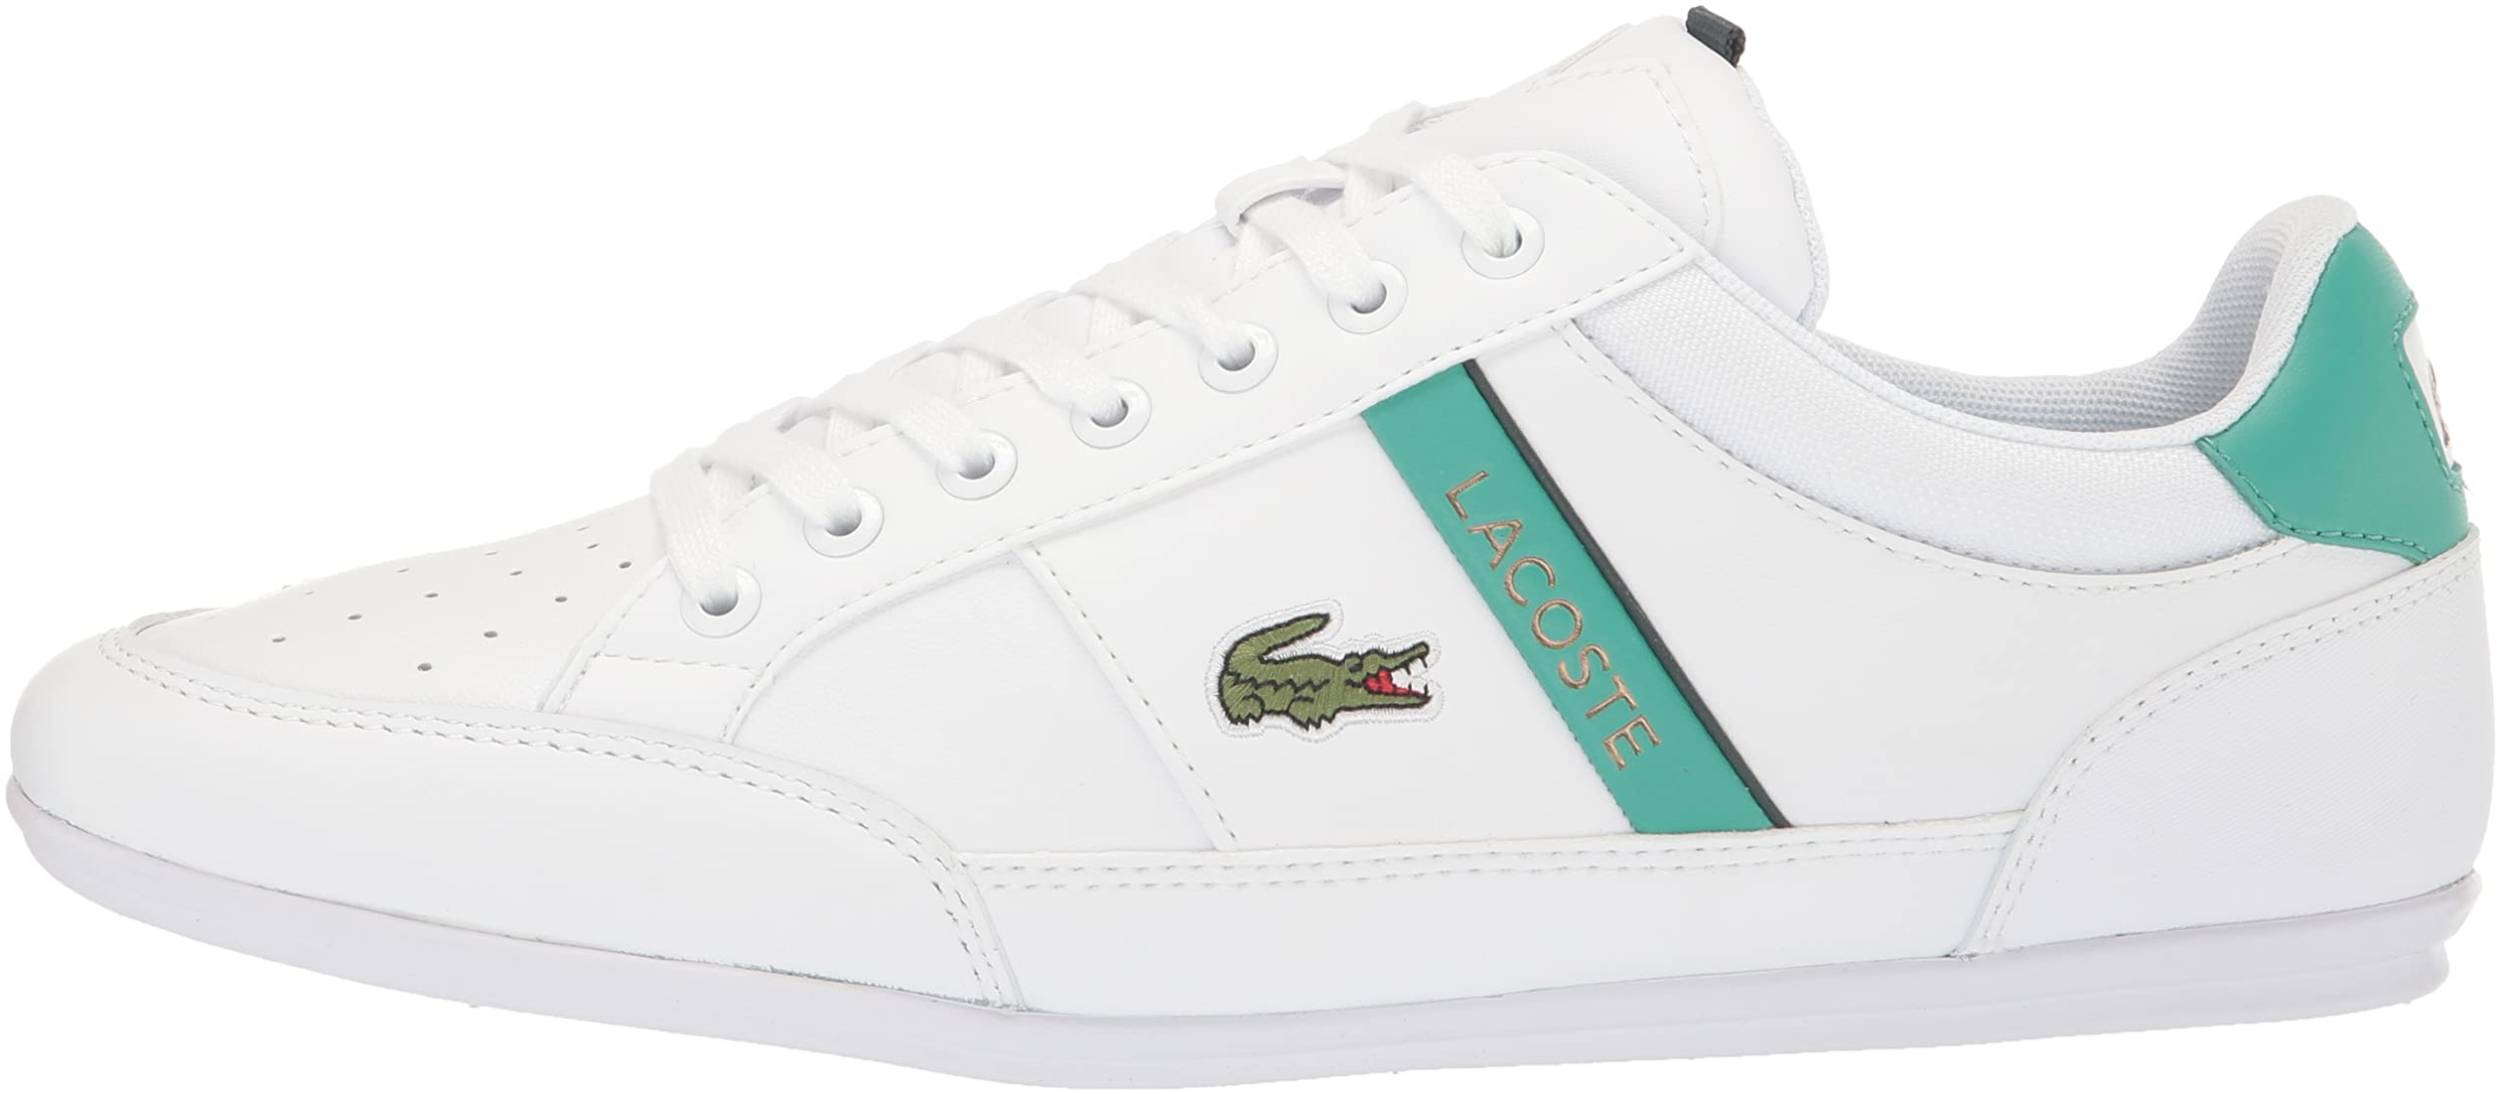 10 White Lacoste sneakers: Save up to 51% | RunRepeat